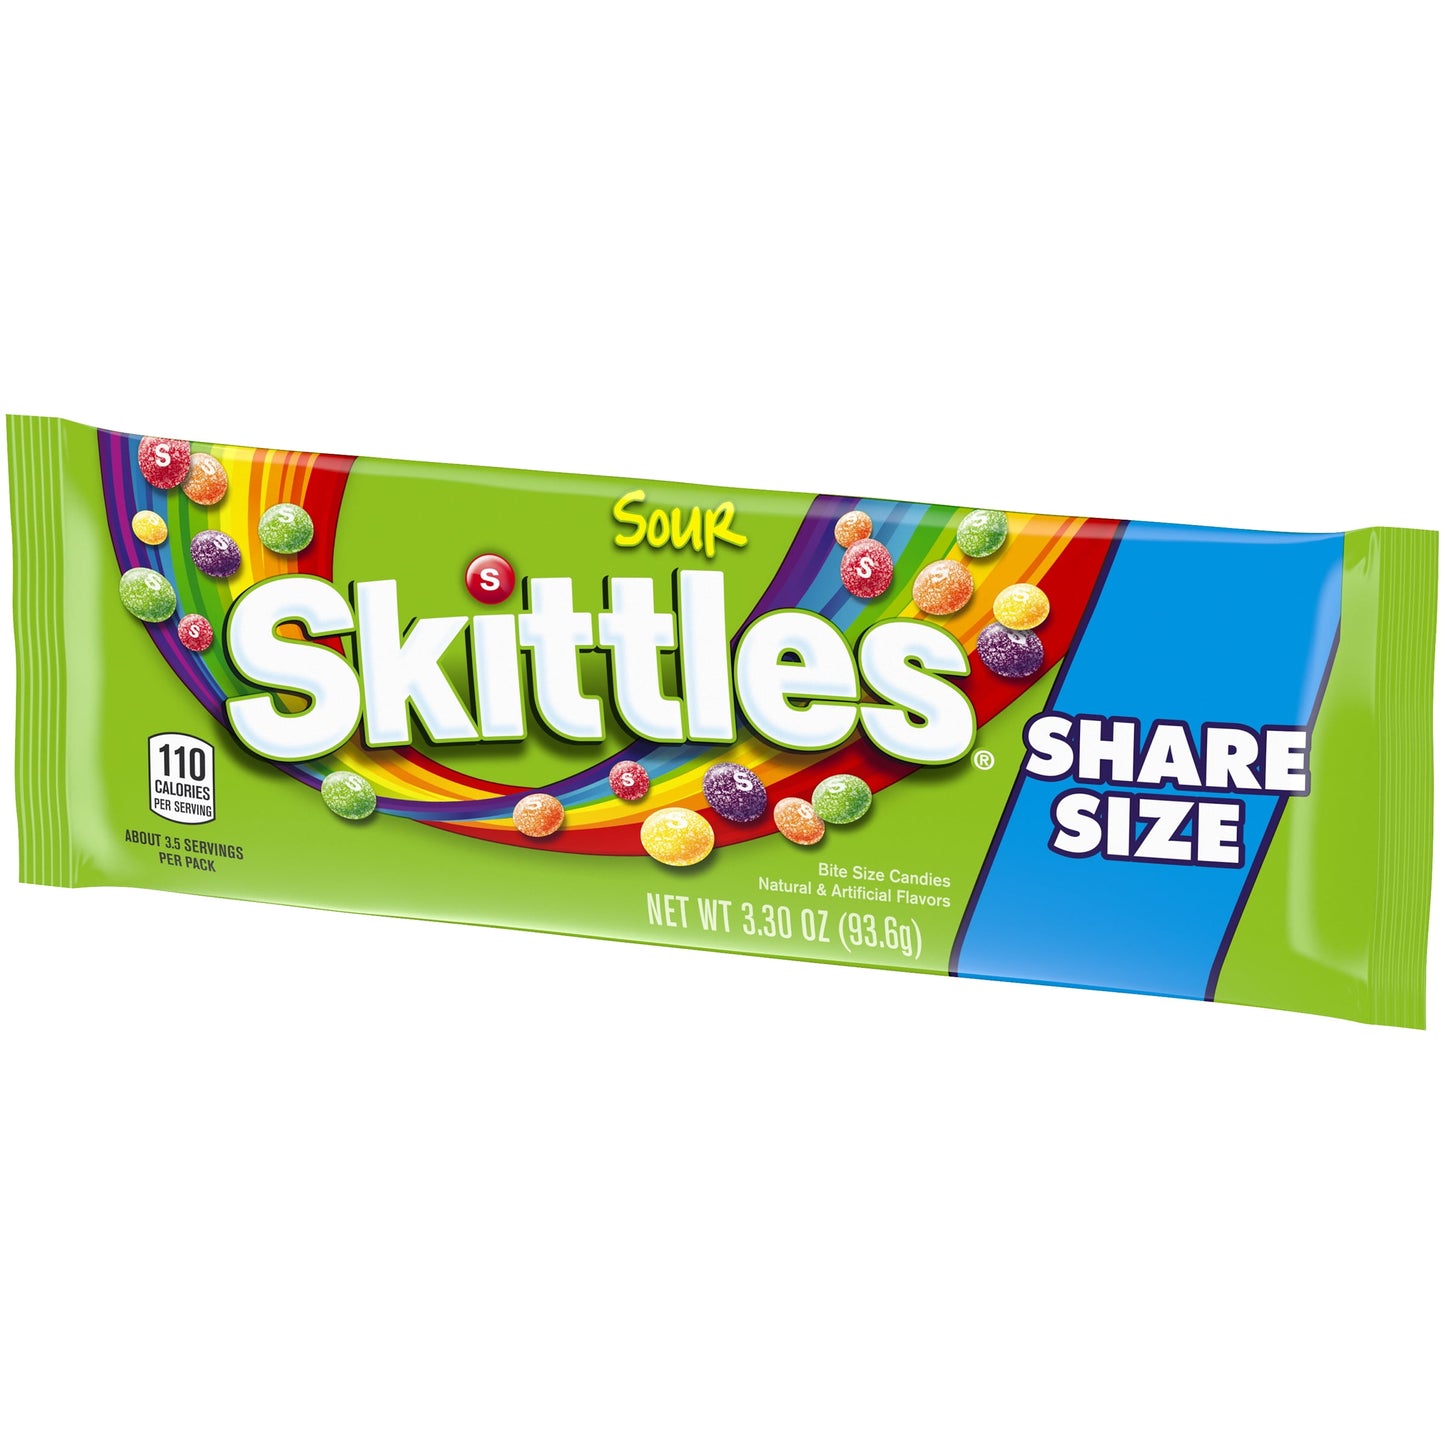 Skittles Sour Candy, Share Size - 3.3 oz Bag